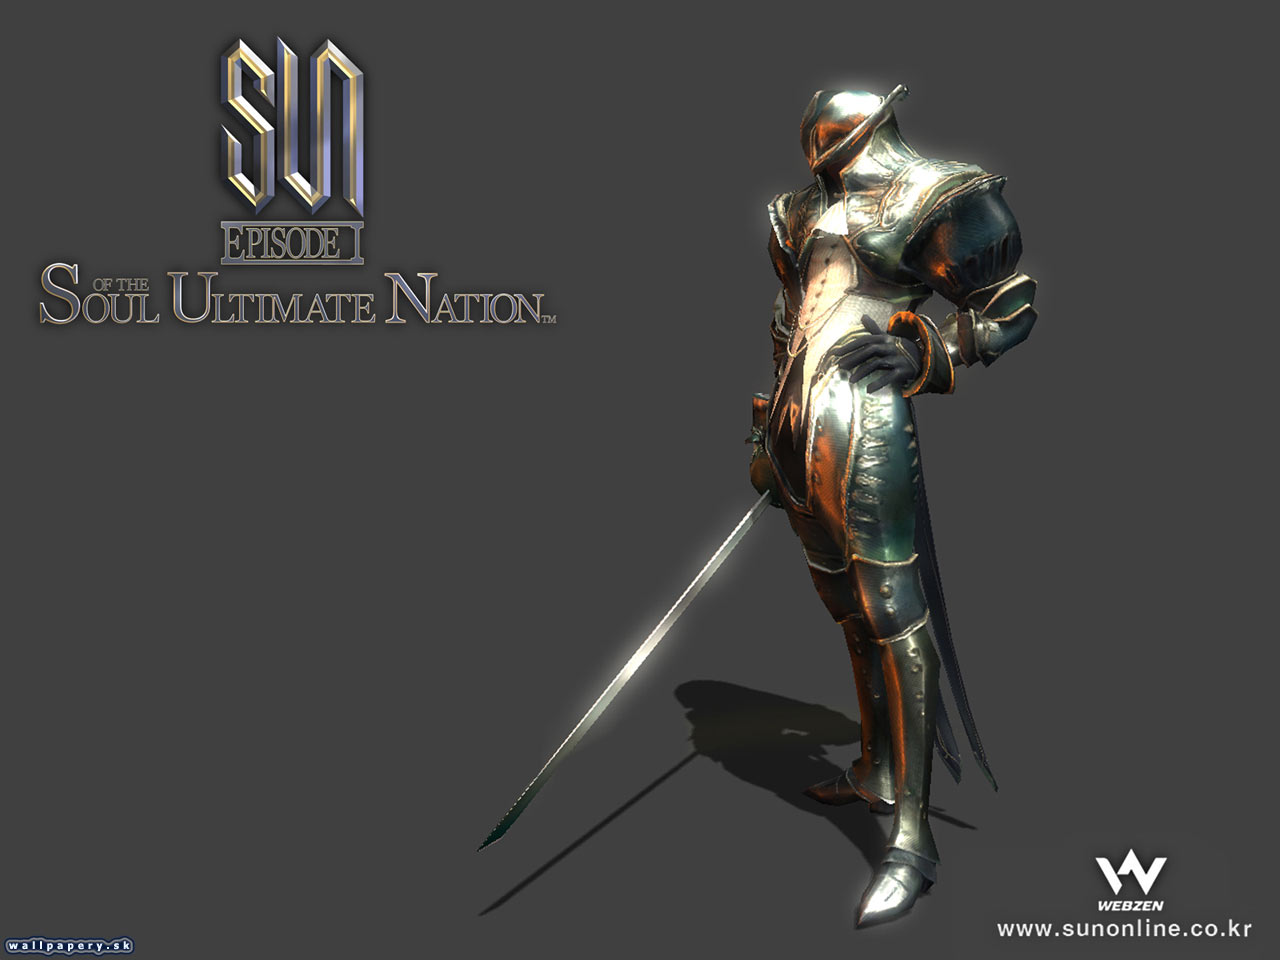 Soul of the Ultimate Nation - wallpaper 18